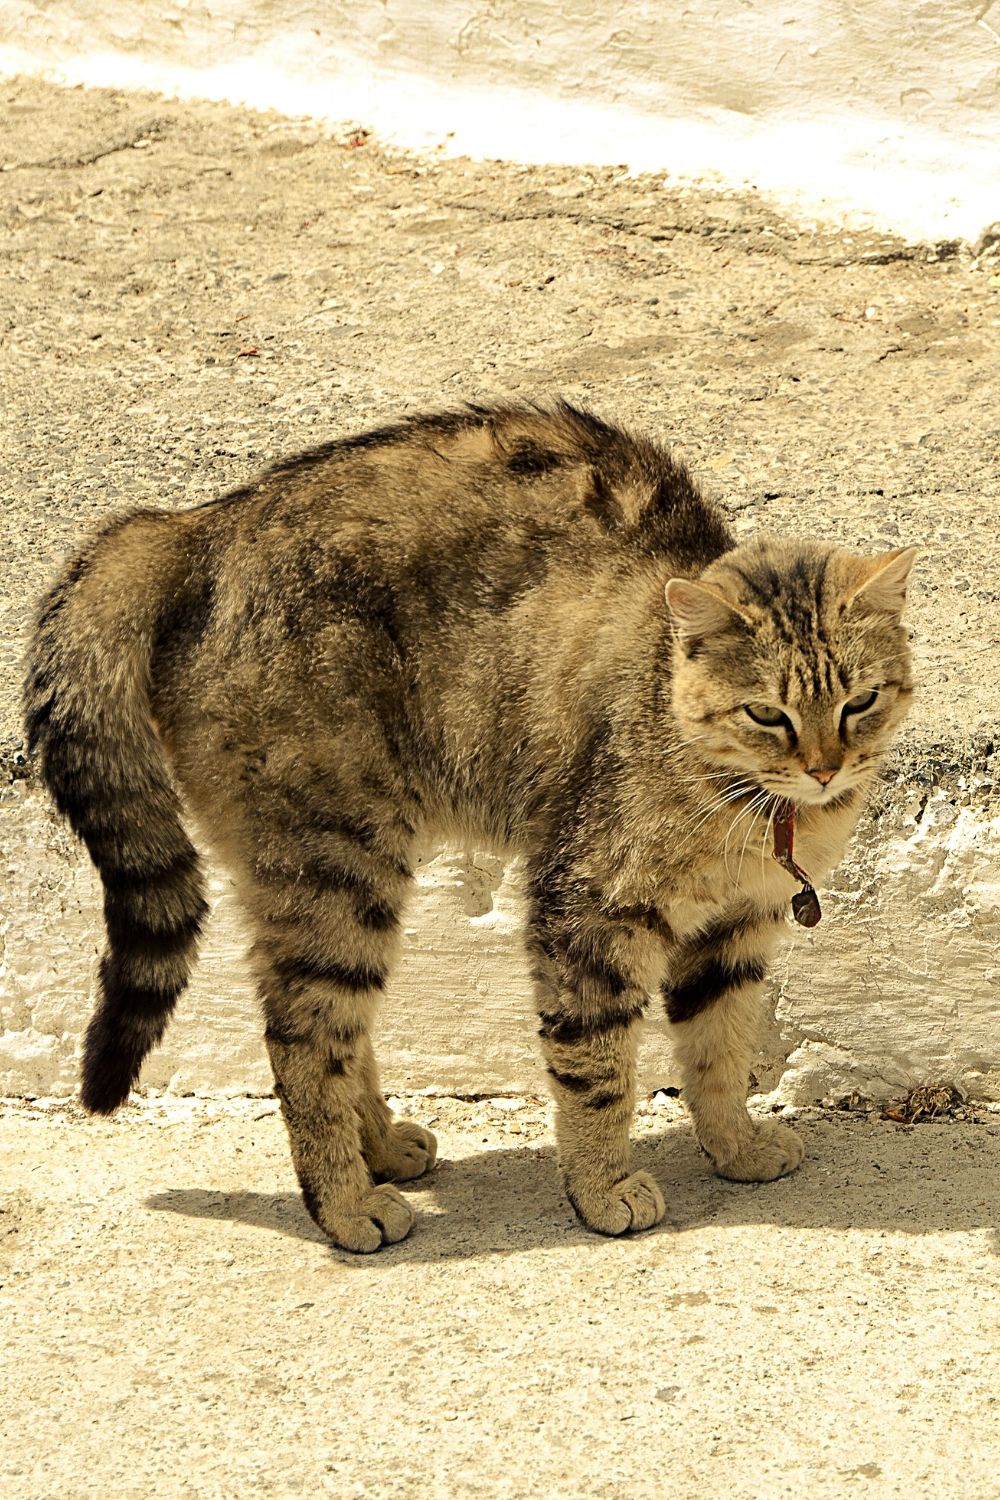 A cat growling from fear or confusion displays a defensive posture